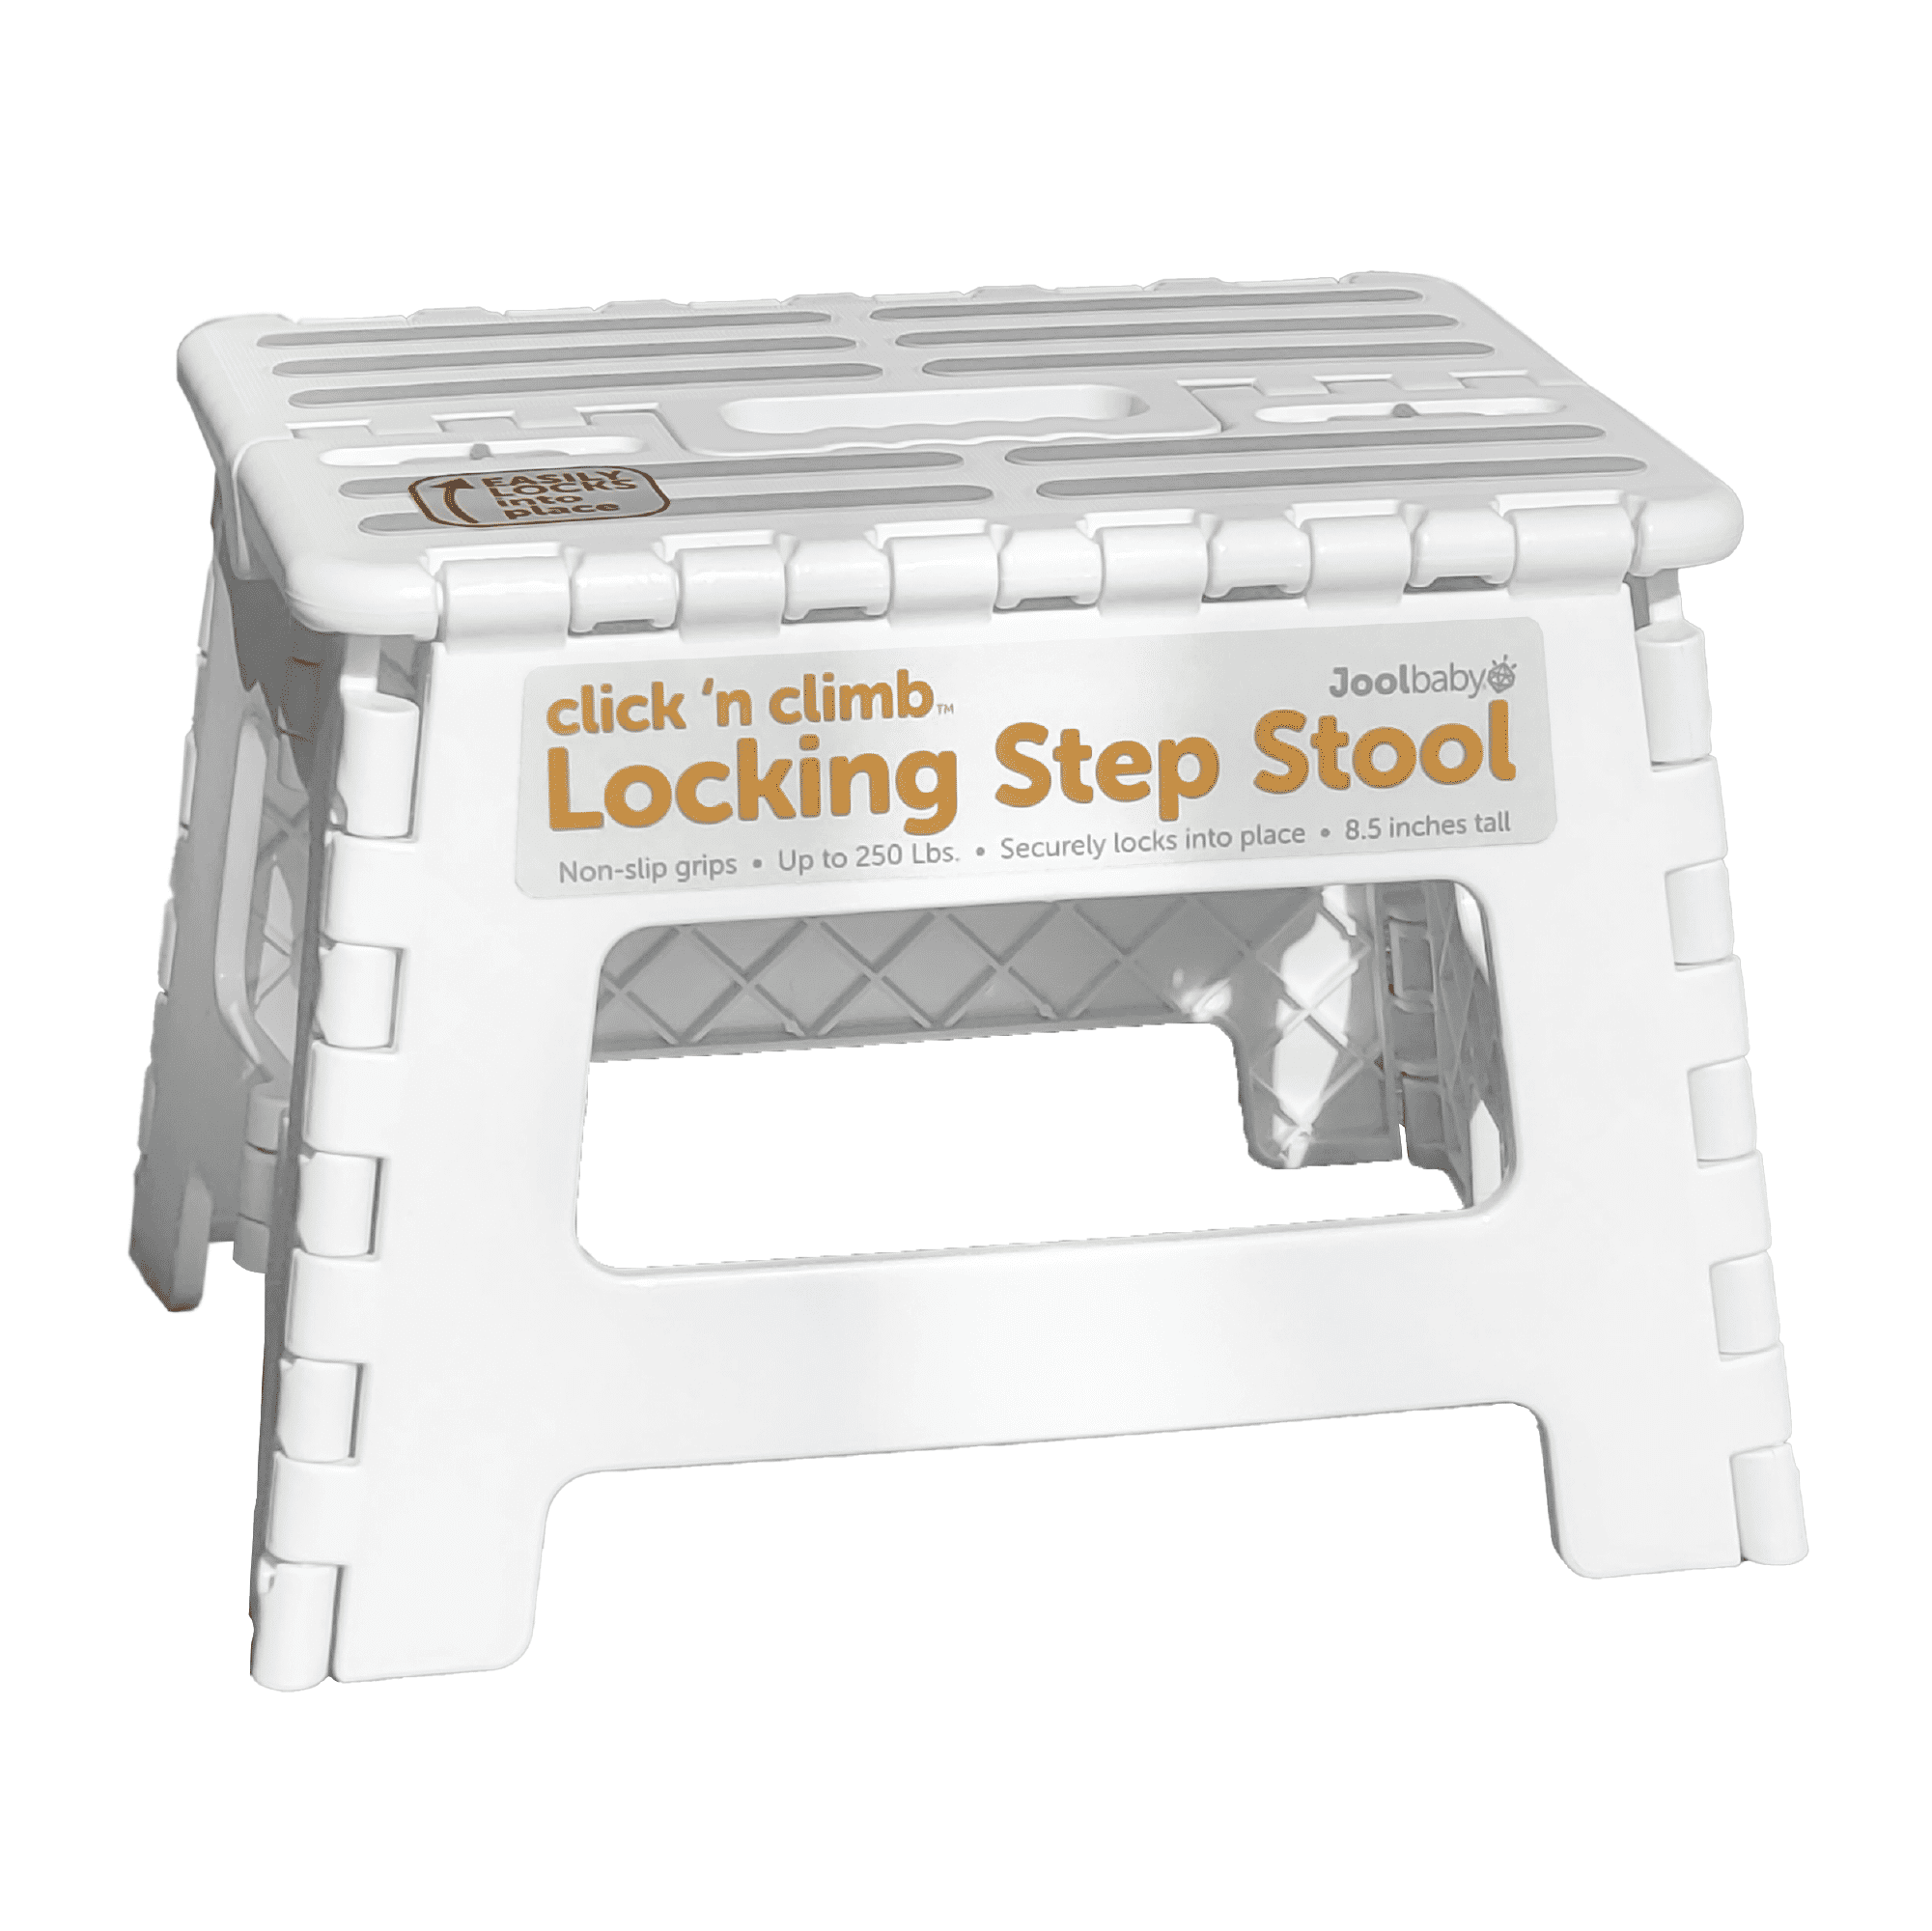 Jool Baby Products Click 'N Climb Locking Step Stool, Non-Slip, Carry Handle - White